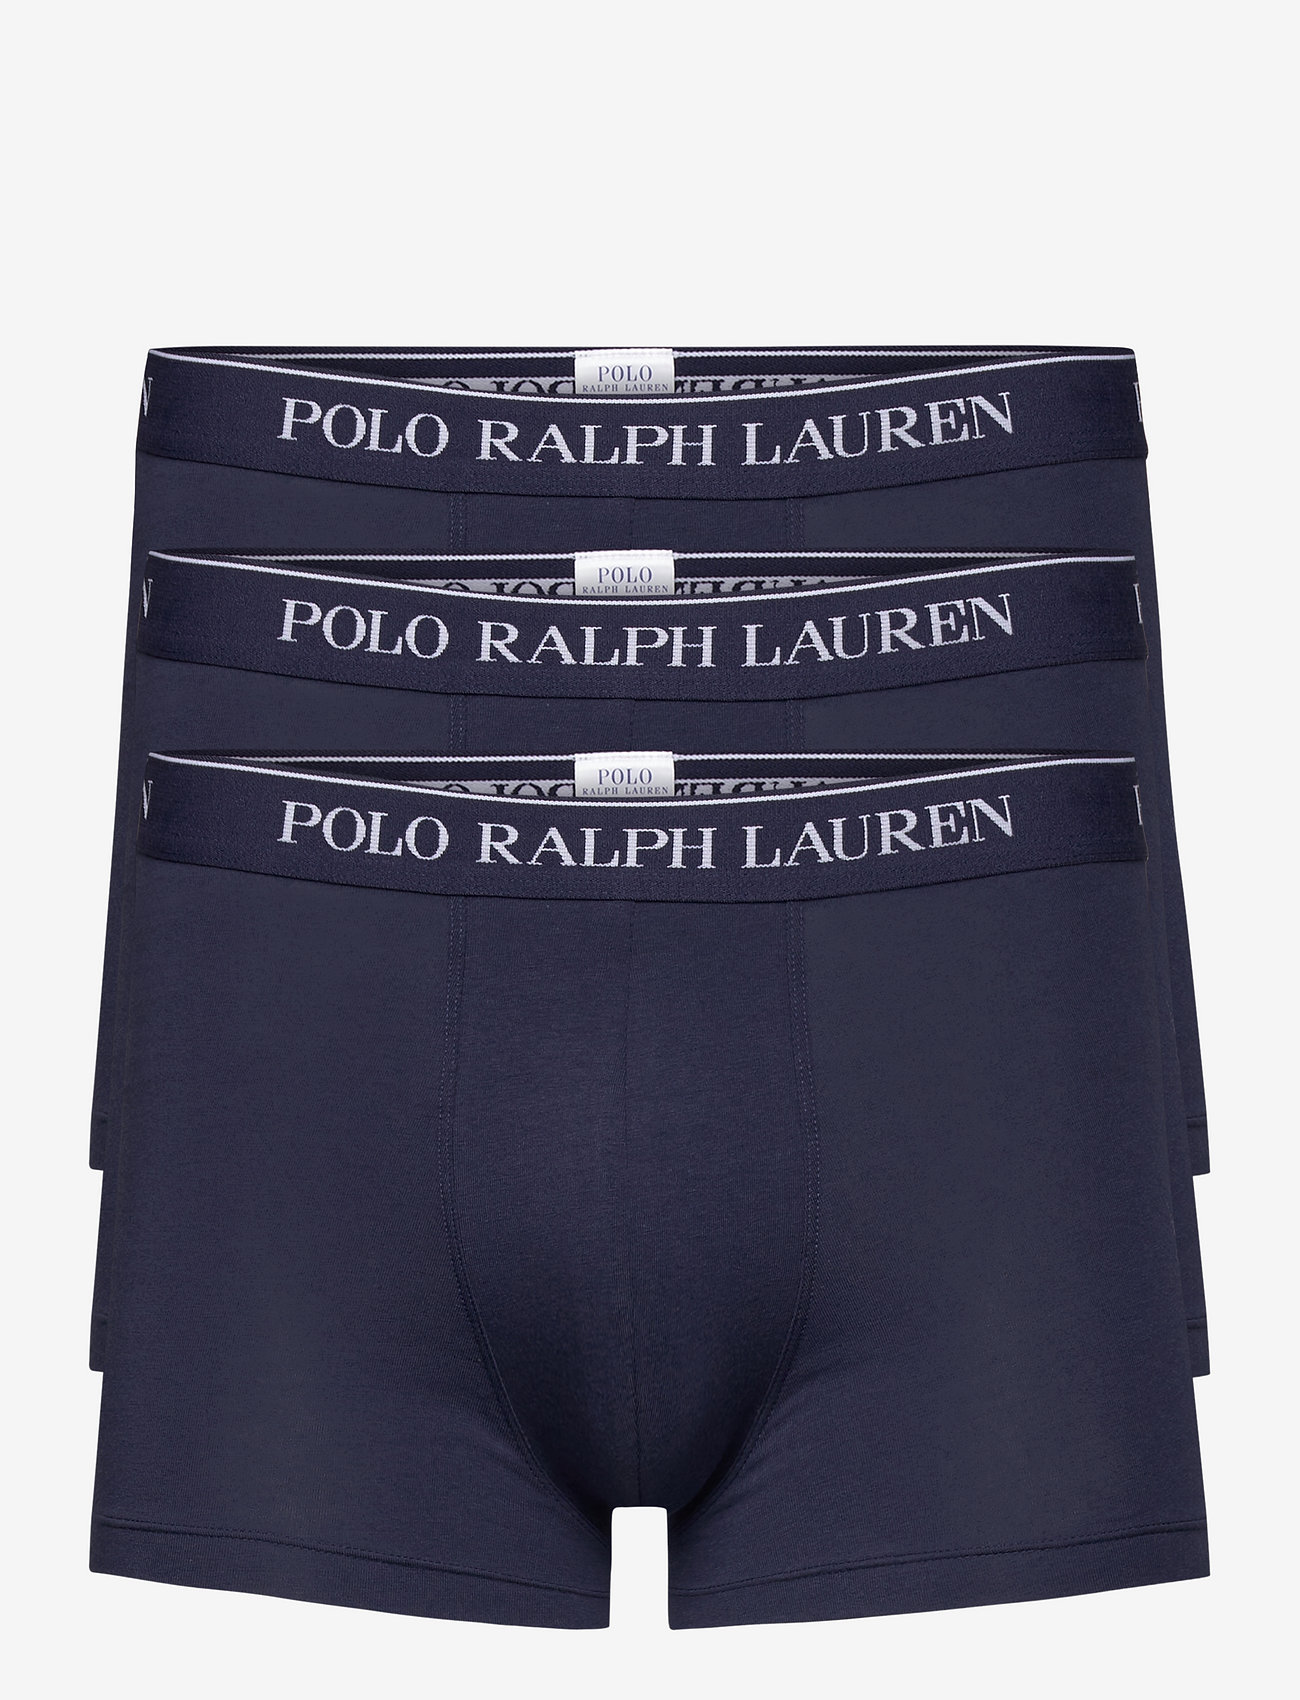 Polo Ralph Lauren Underwear - Stretch Cotton Trunk 3-Pack - multipack underpants - 3pk cr nvy/cr nvy/ cr nvy - 0